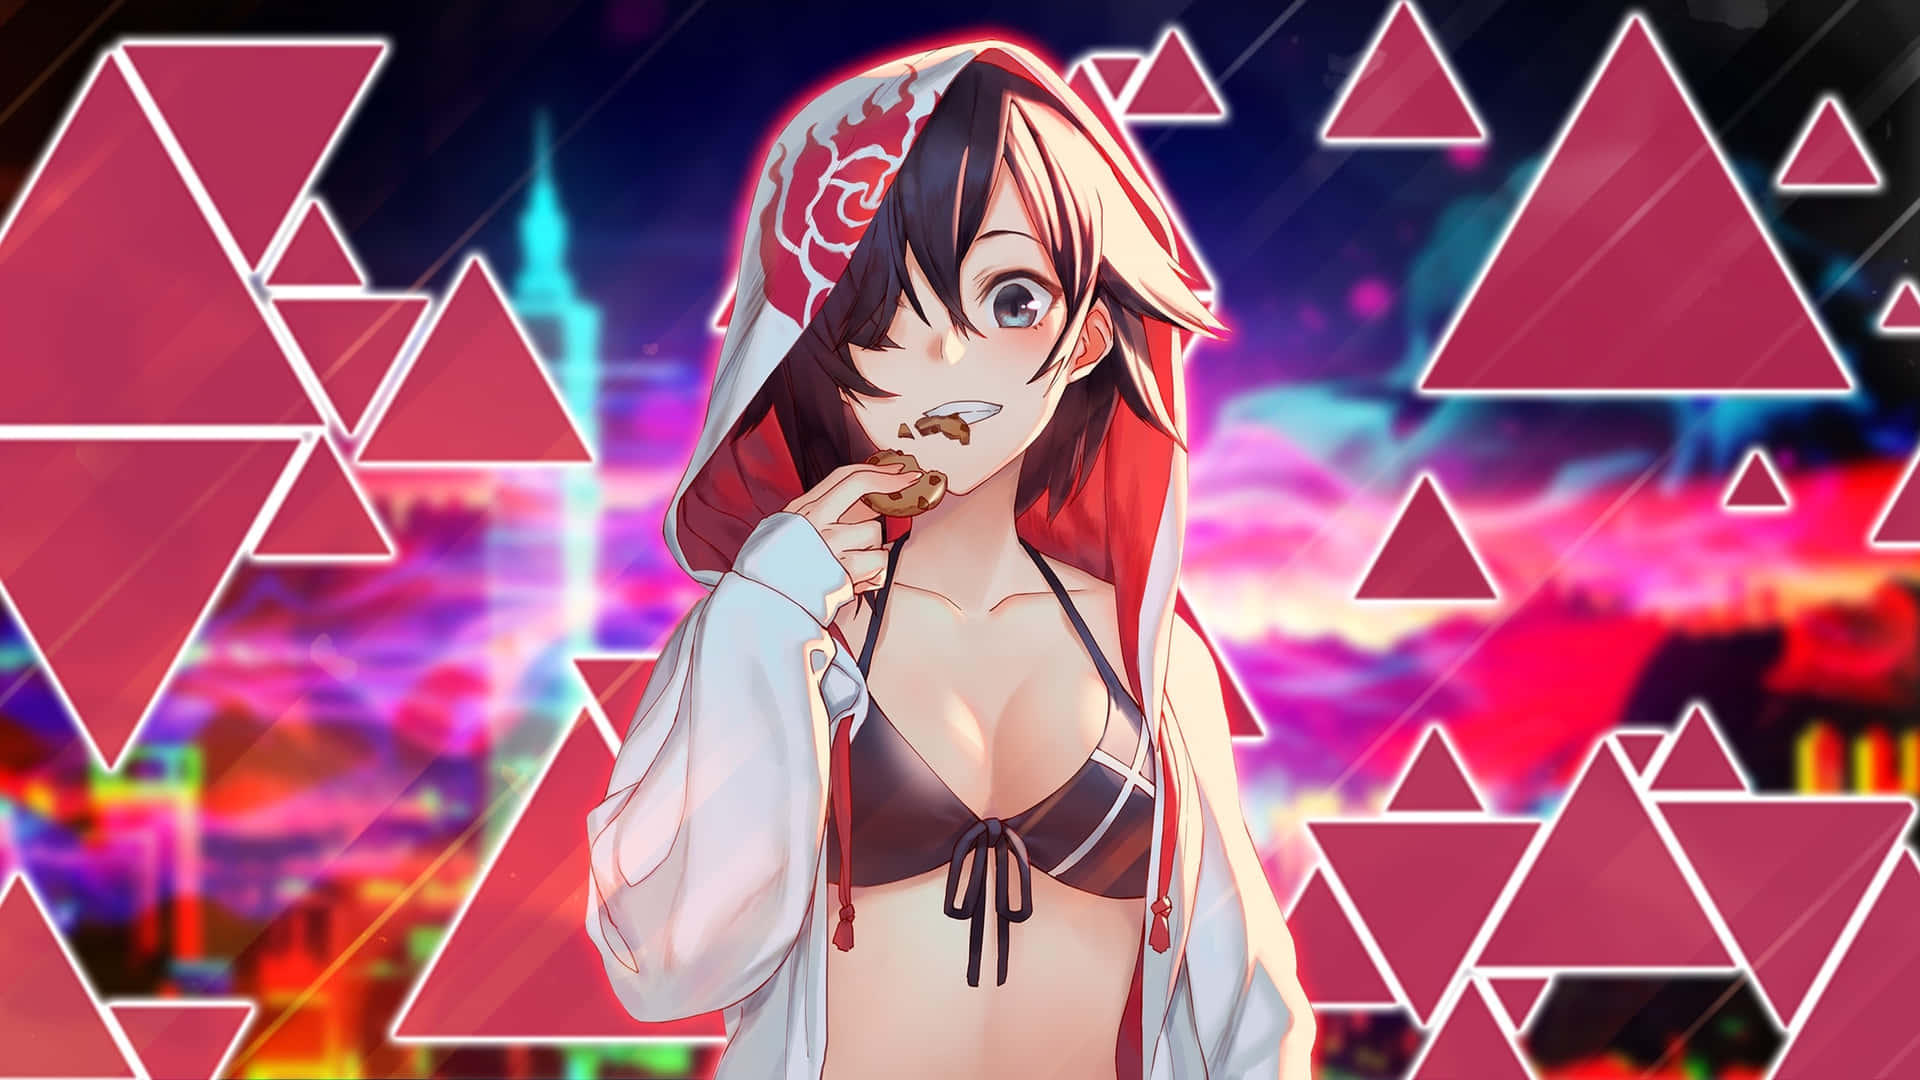 Anime Girl Eating Cookie Neon City Background2560x1440 Wallpaper